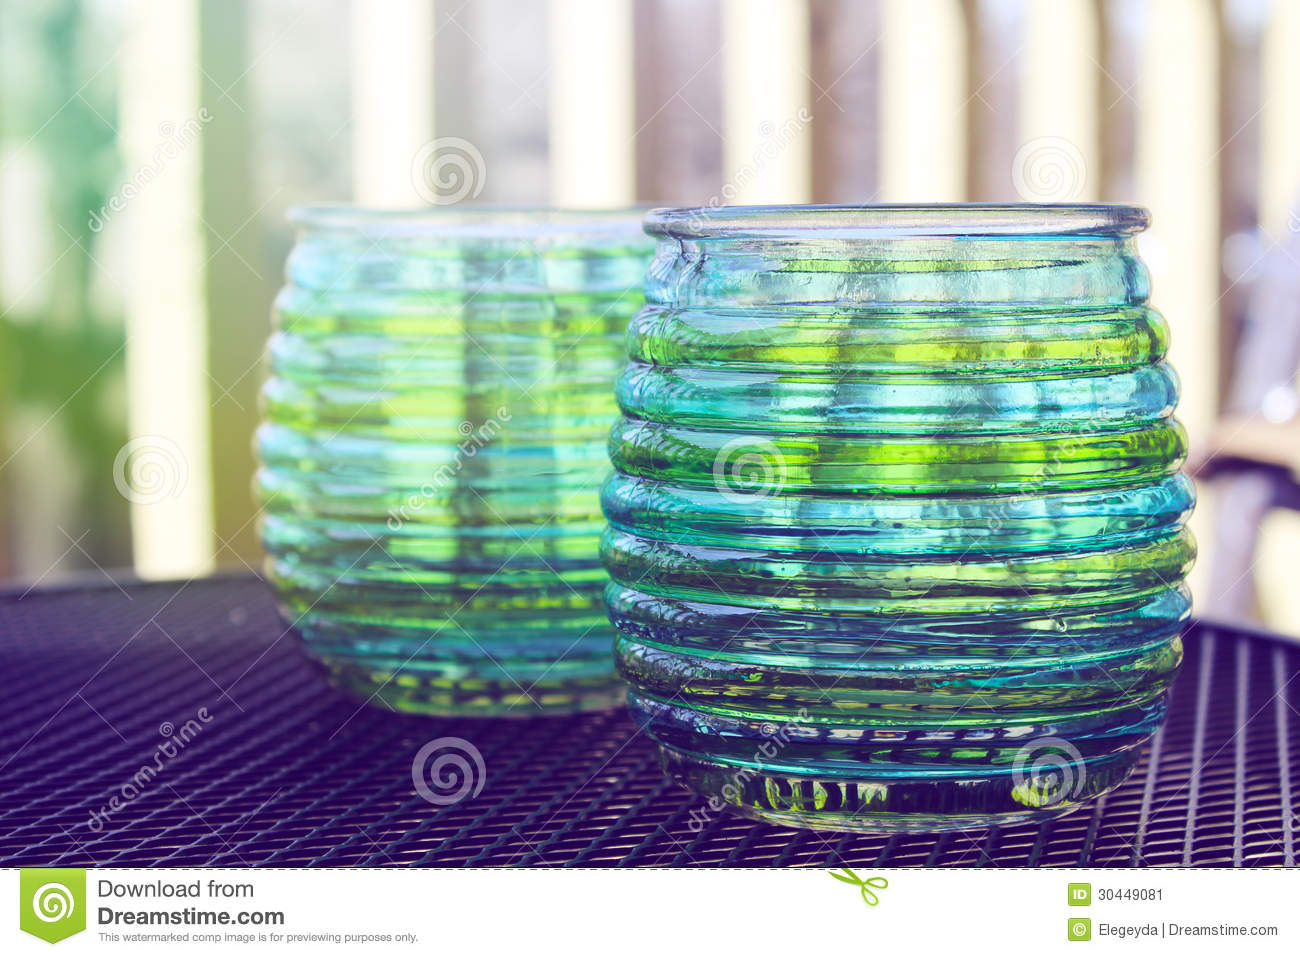 Beautiful Design With Glass Cups Stock Image   Image  30449081